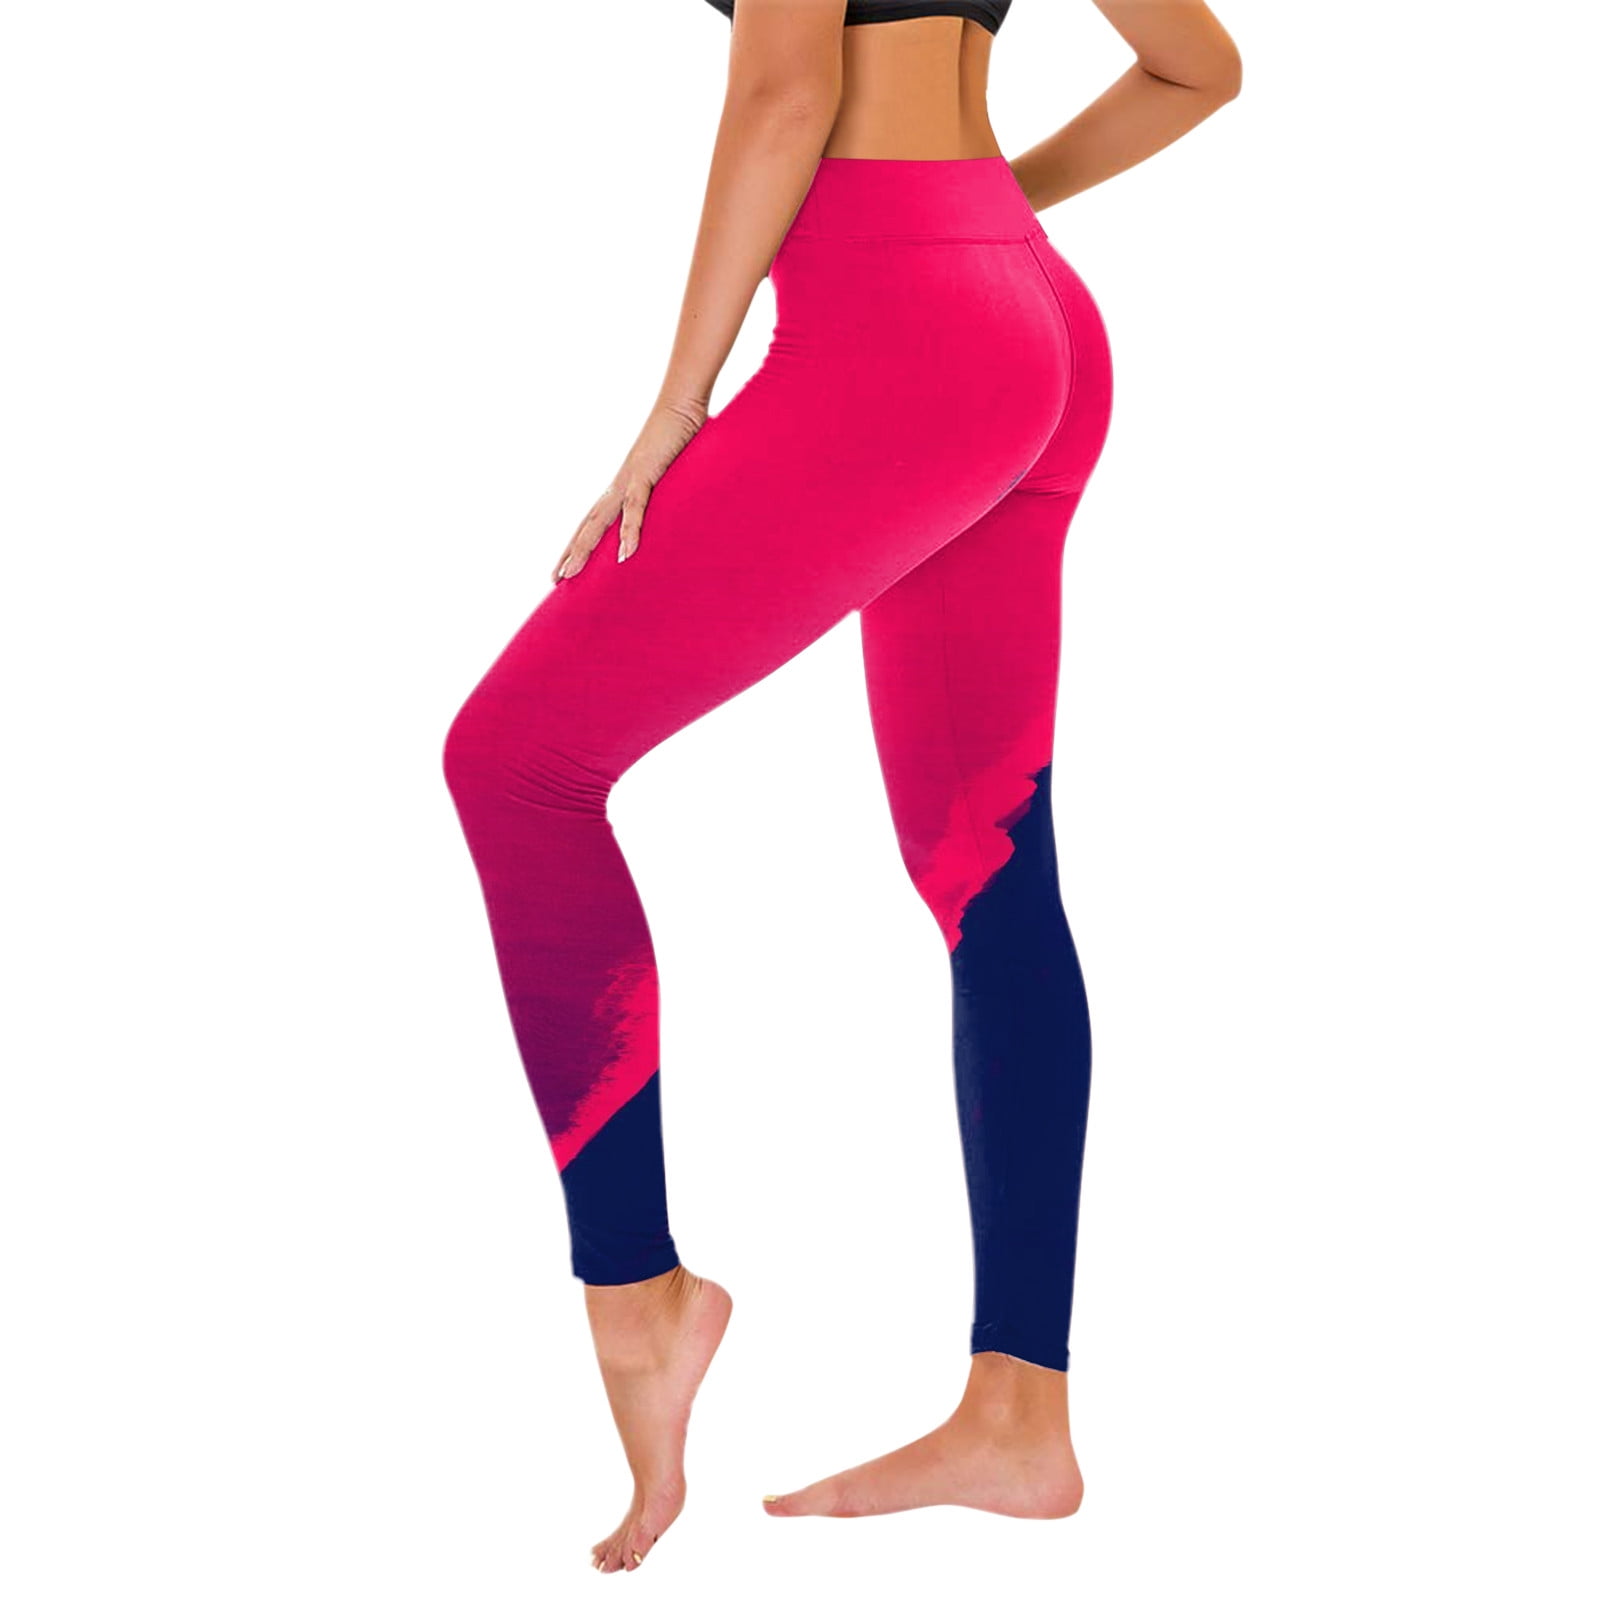 BLVB Womens Scrunch Yoga Leggings with Pockets Stretch High Waist Gym  Sports Pants Workout Athletic Tights 